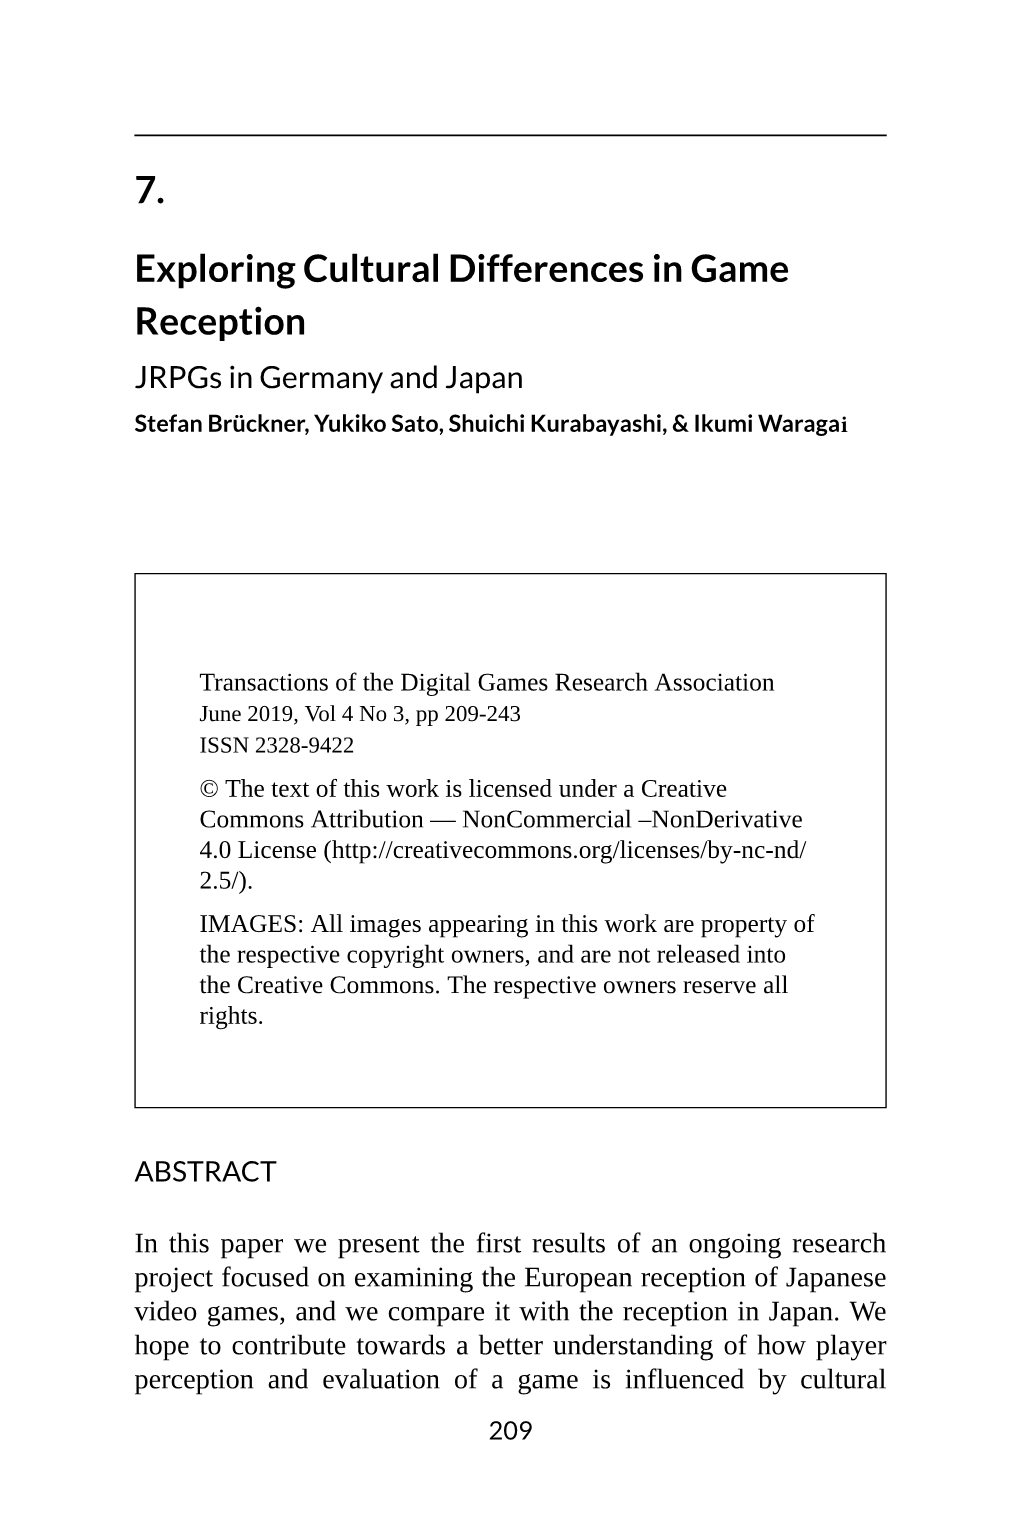 7. Exploring Cultural Differences in Game Reception